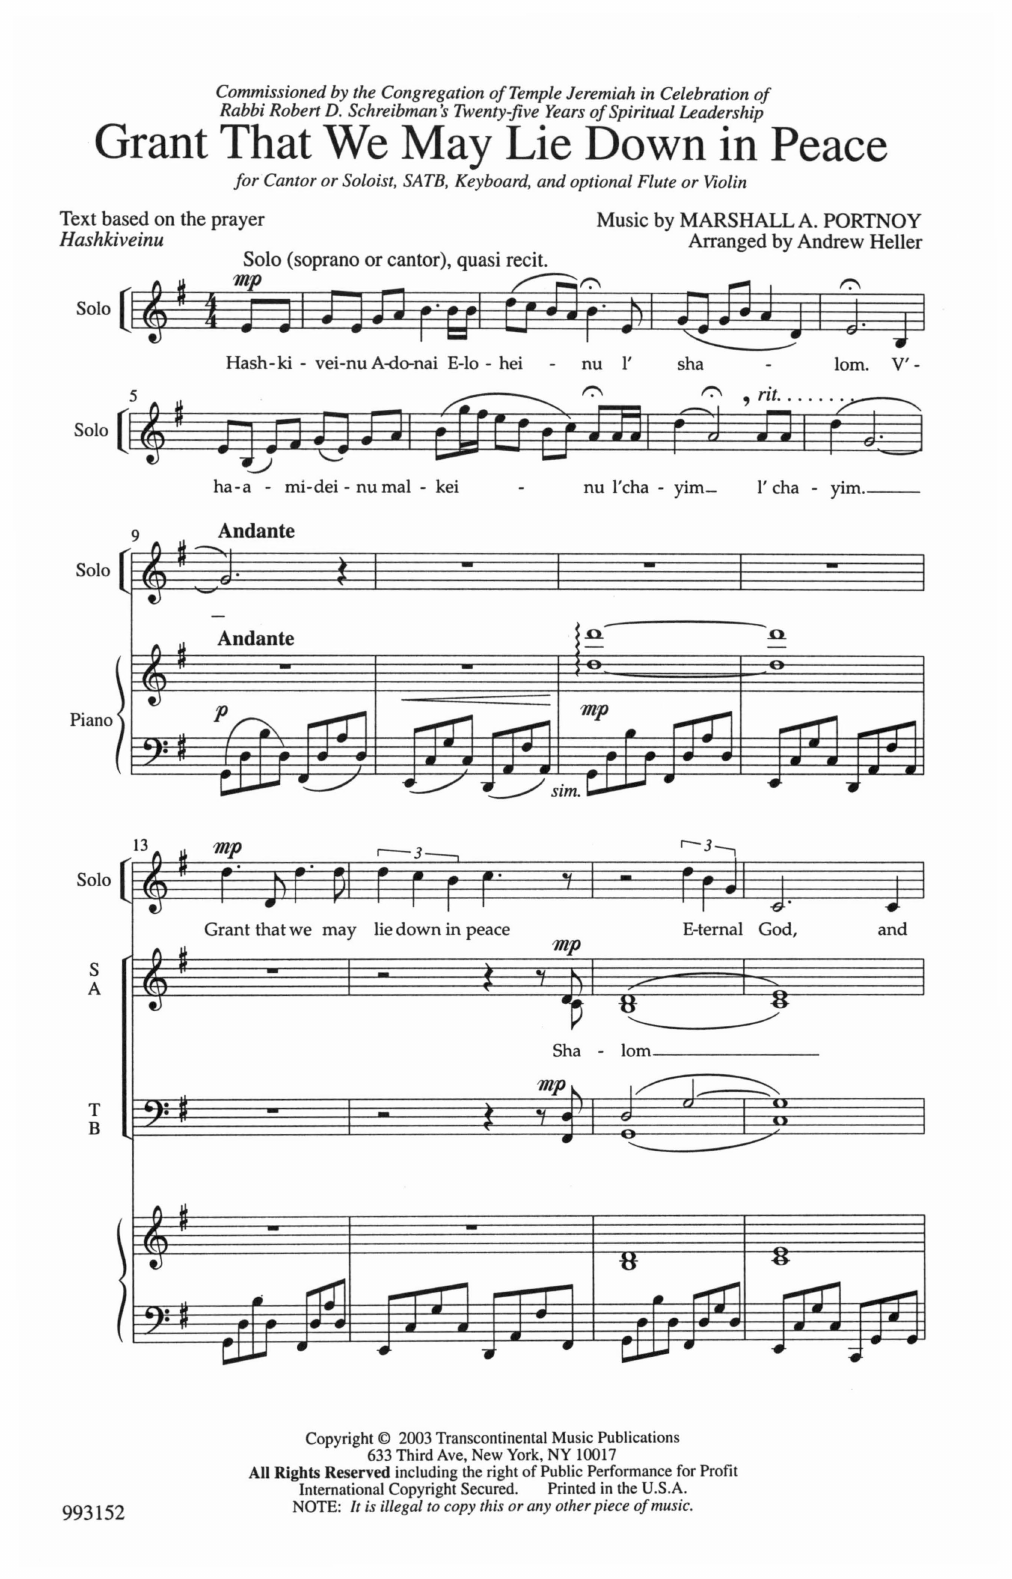 Download Marshall Portnoy Grant That We Lie Down Sheet Music